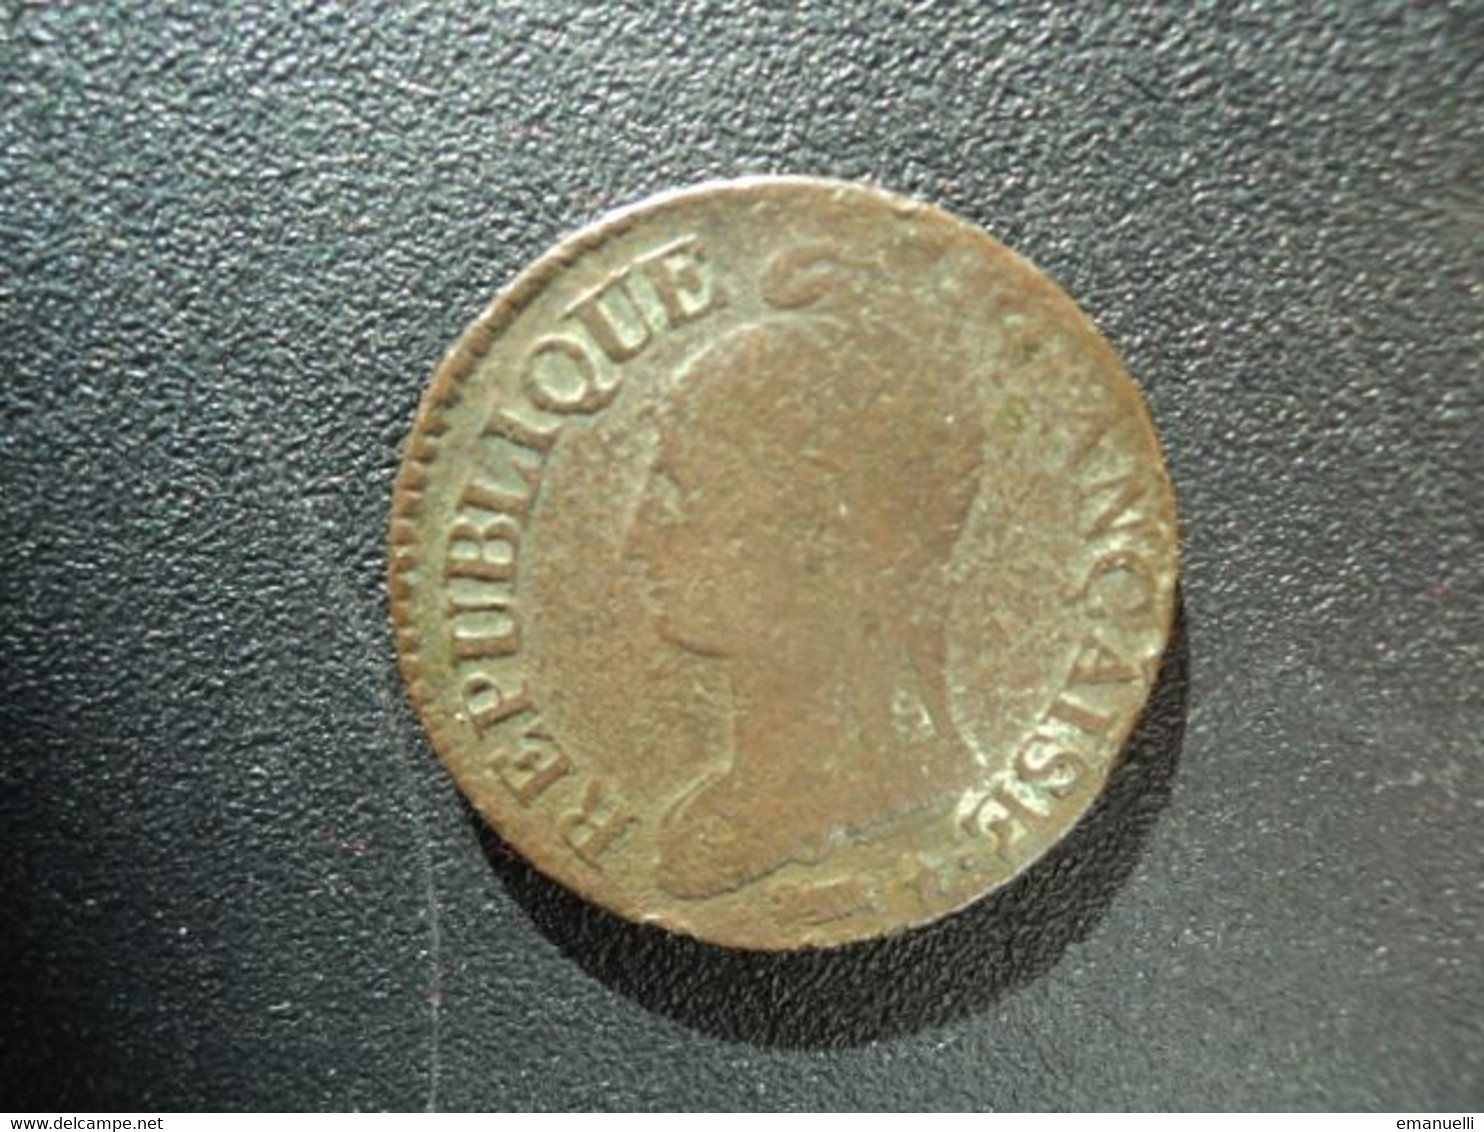 FRANCE : 5 CENTIMES   L'AN 5 D    F.115 / G.126 / KM 640.5     B++ * - 1795-1799 French Directory